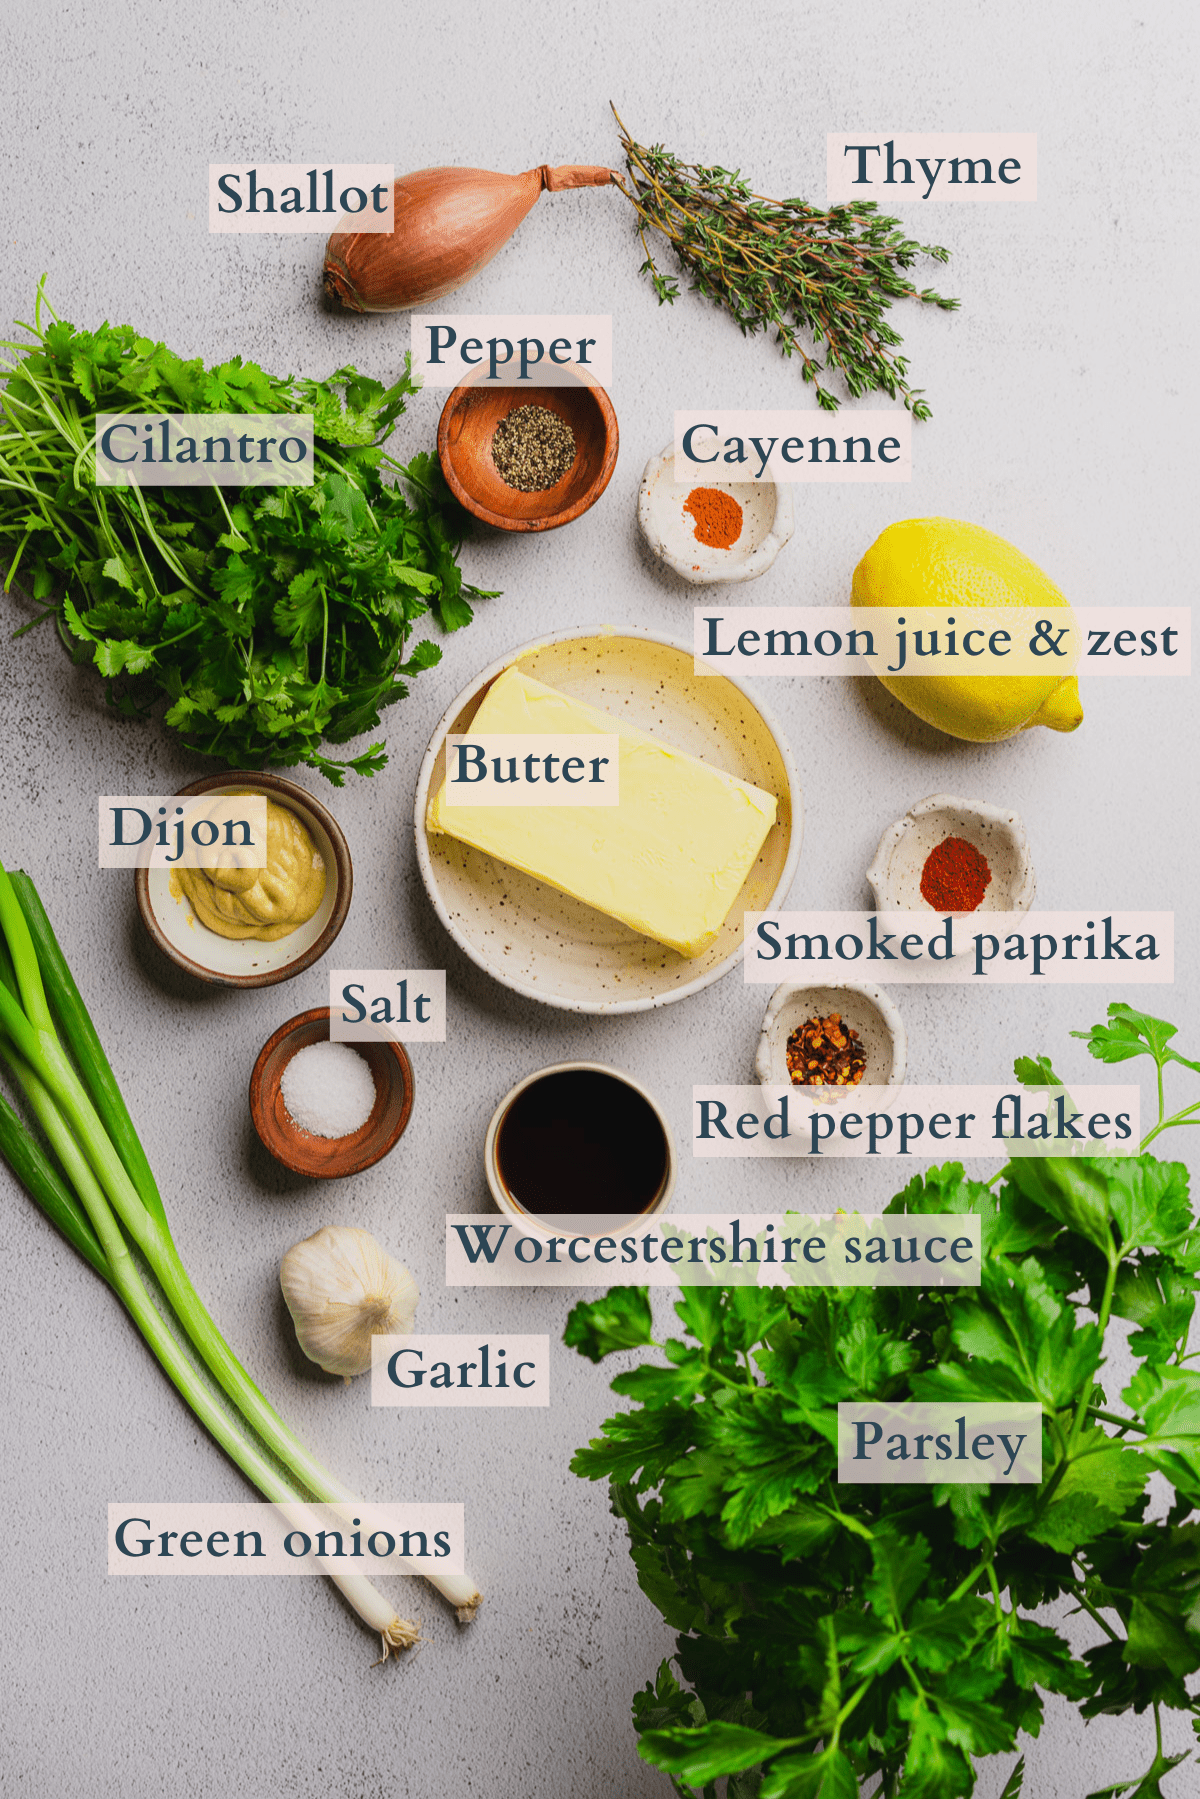 cowboy butter ingredients graphic with text to denote each ingredient including butter, parsley, cilantro, thyme, green onions, lemon, cayenne, pepper, salt, red pepper flakes, smoked paprika, Worcestershire sauce, garlic, shallot, and dijon mustard. 